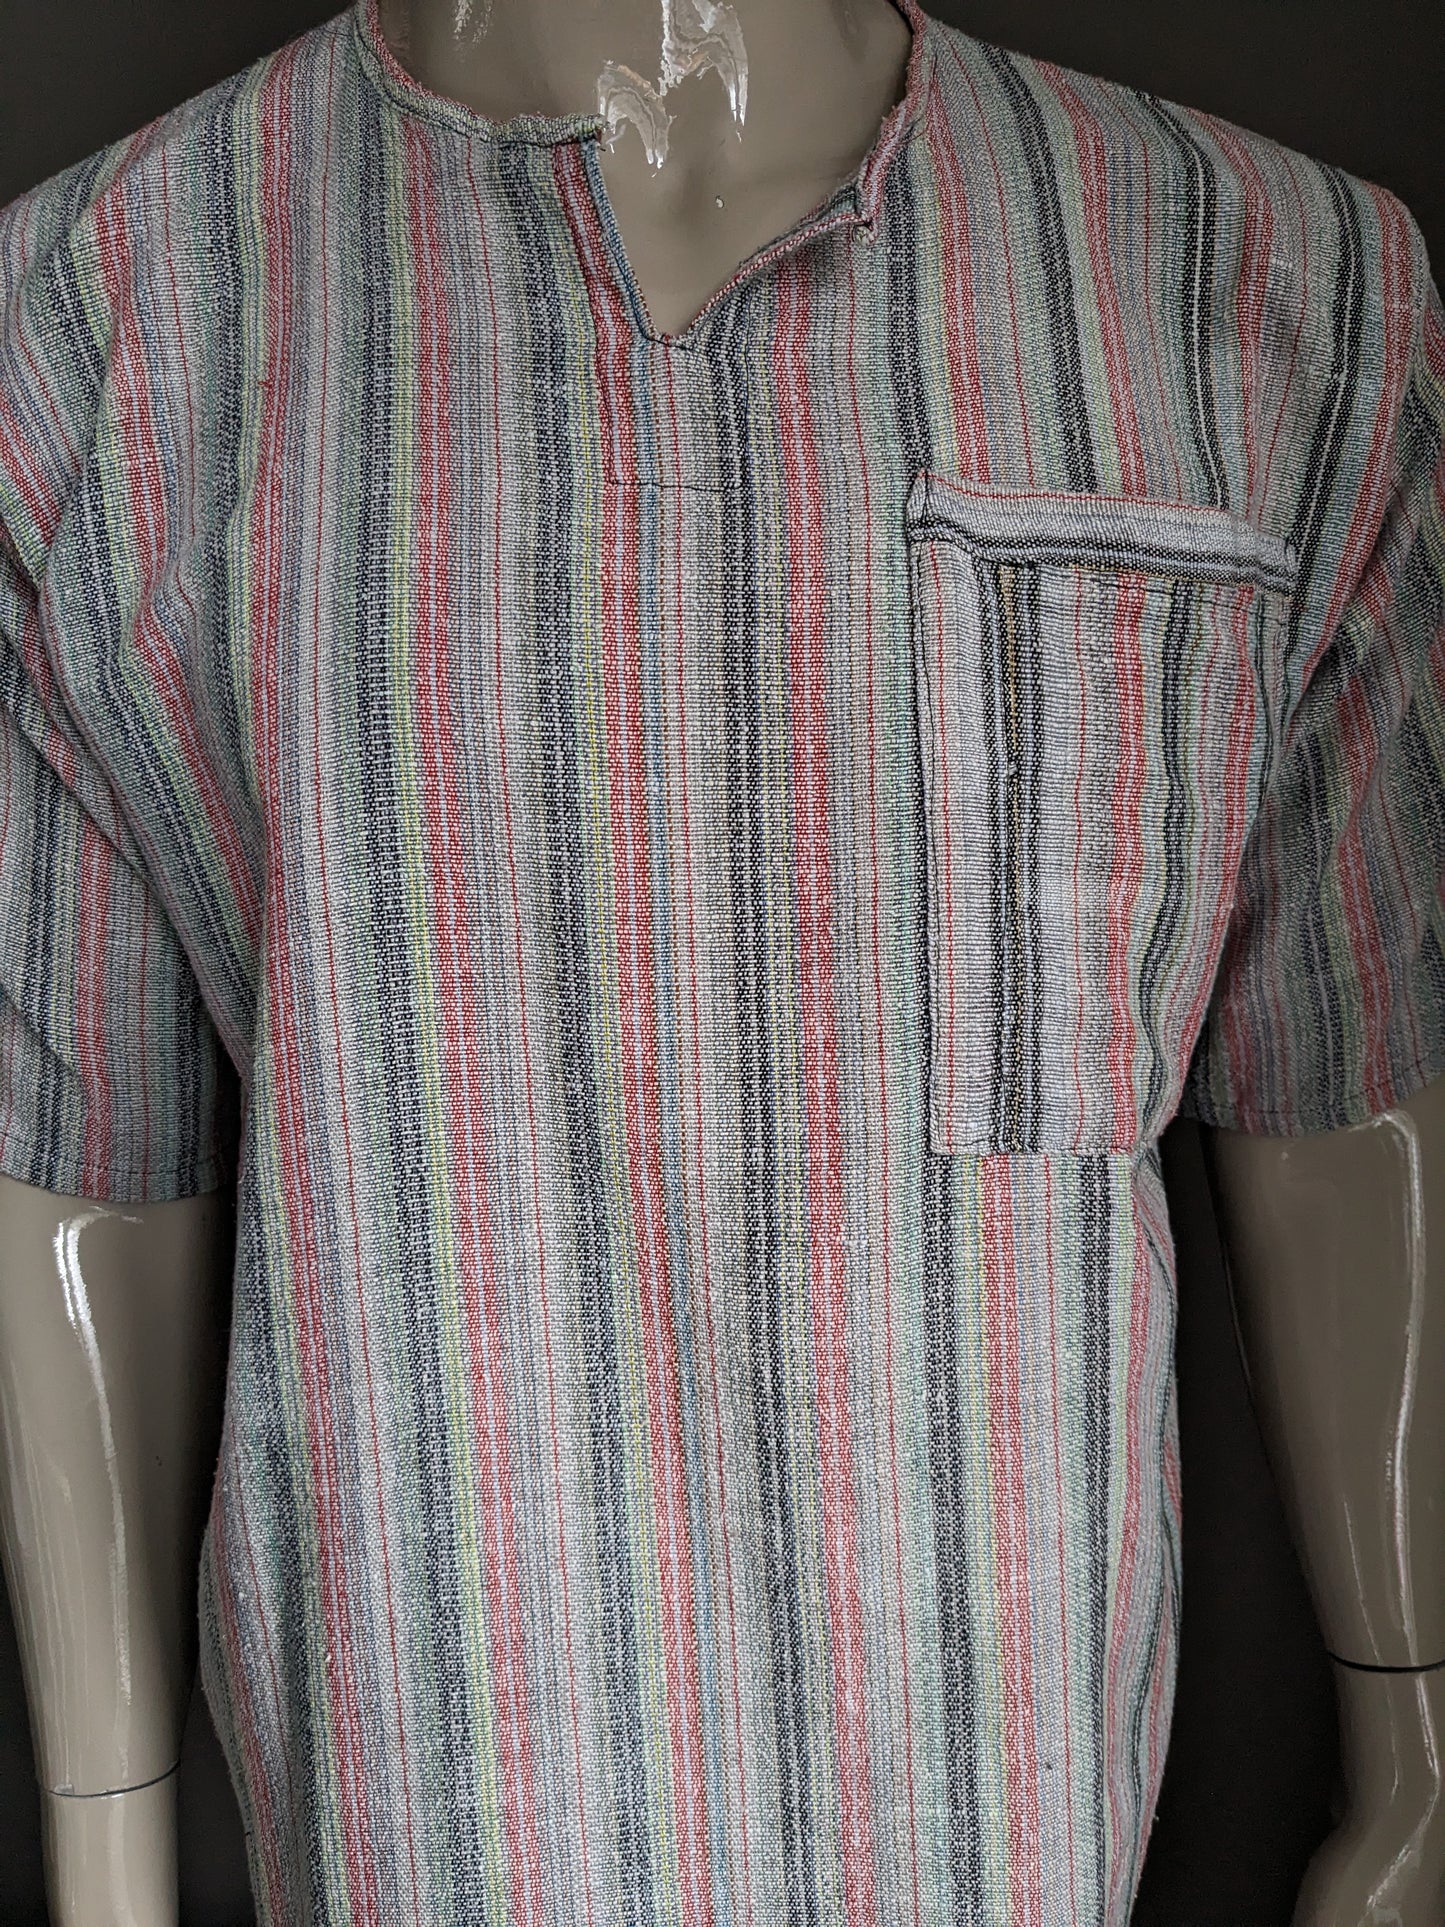 Vintage shirt / polo with mao / raised collar. Yellow green striped. Size XL.